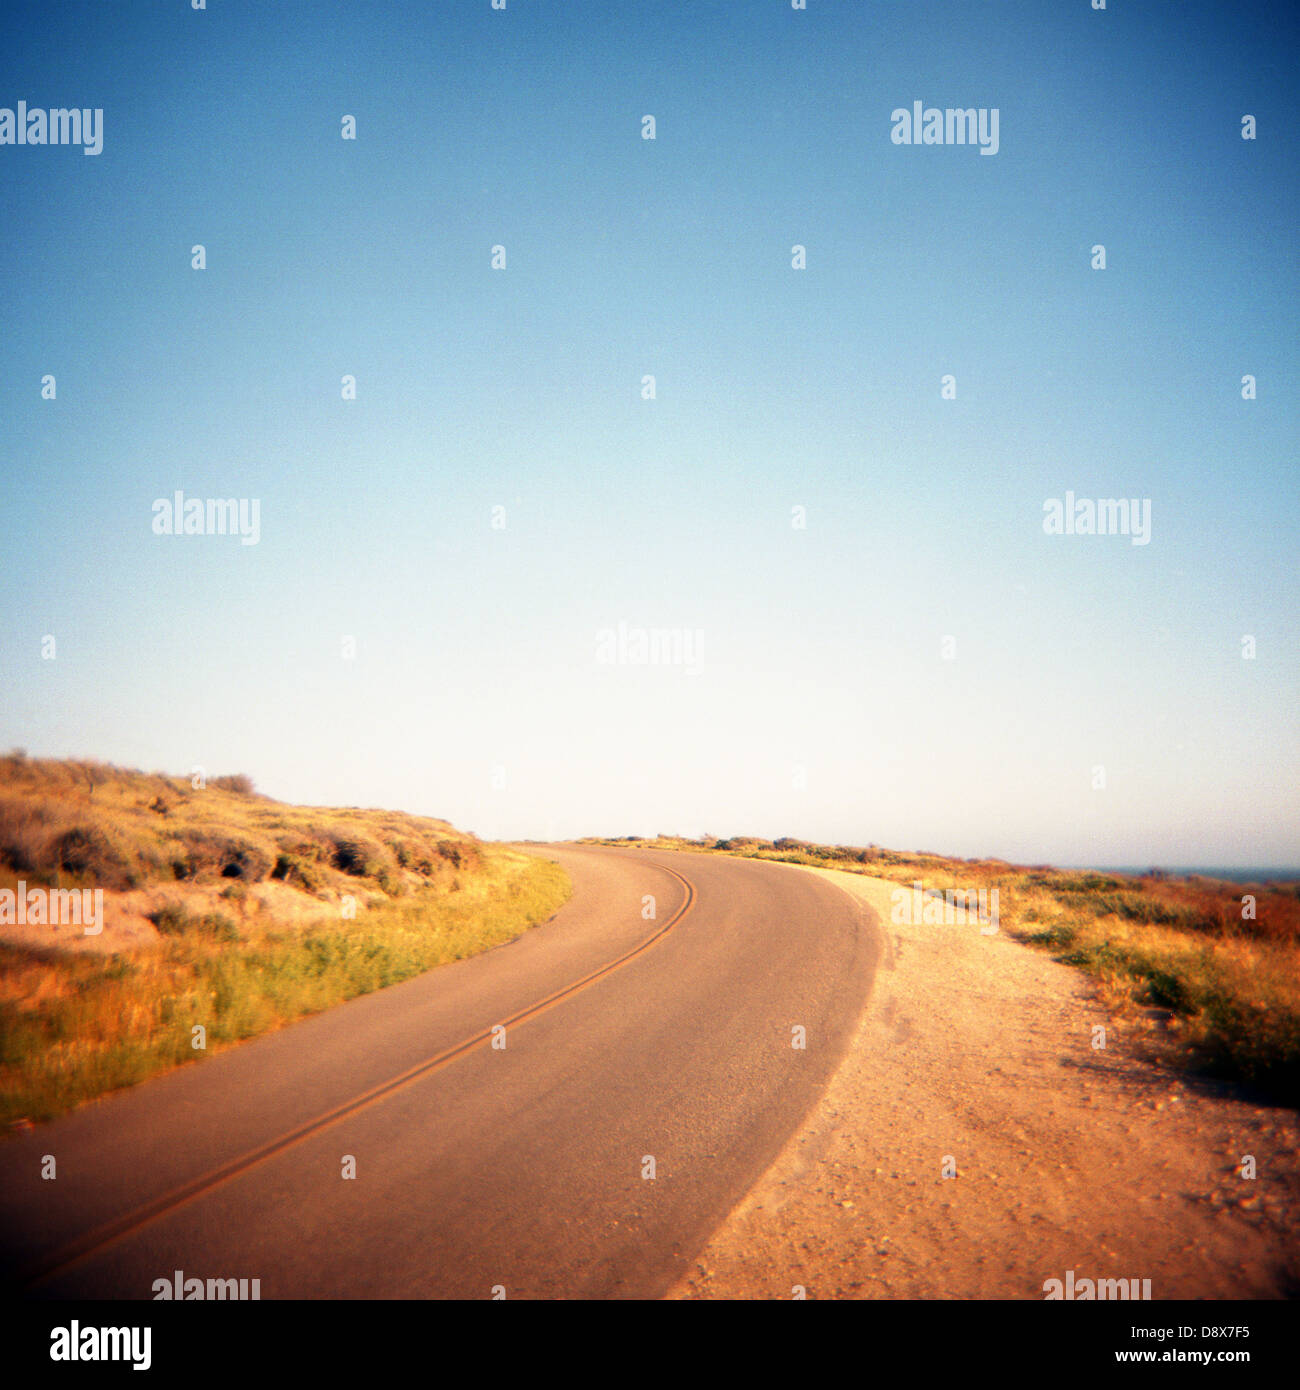 medium format square film photograph of a curved road with blue skies in coastal California Stock Photo